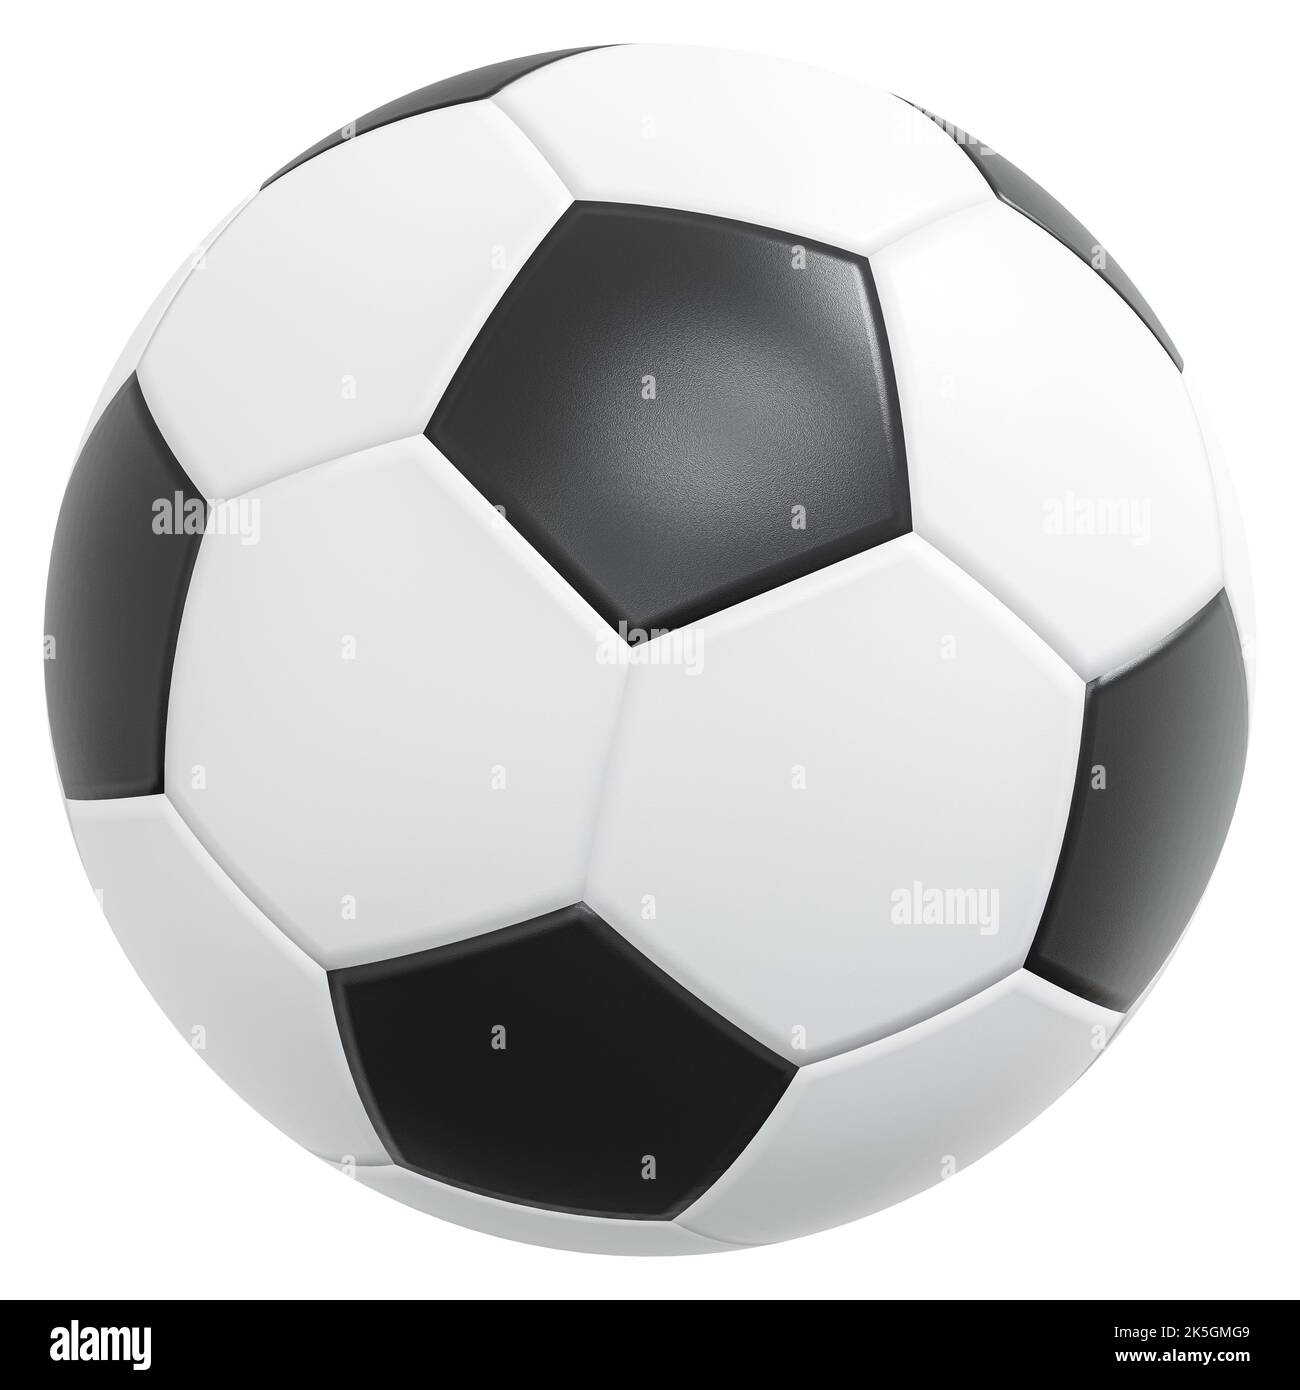 Soccer ball or football with leather texture . Simple black and white color design . Isolated . Embedded clipping paths . 3D rendering . Stock Photo